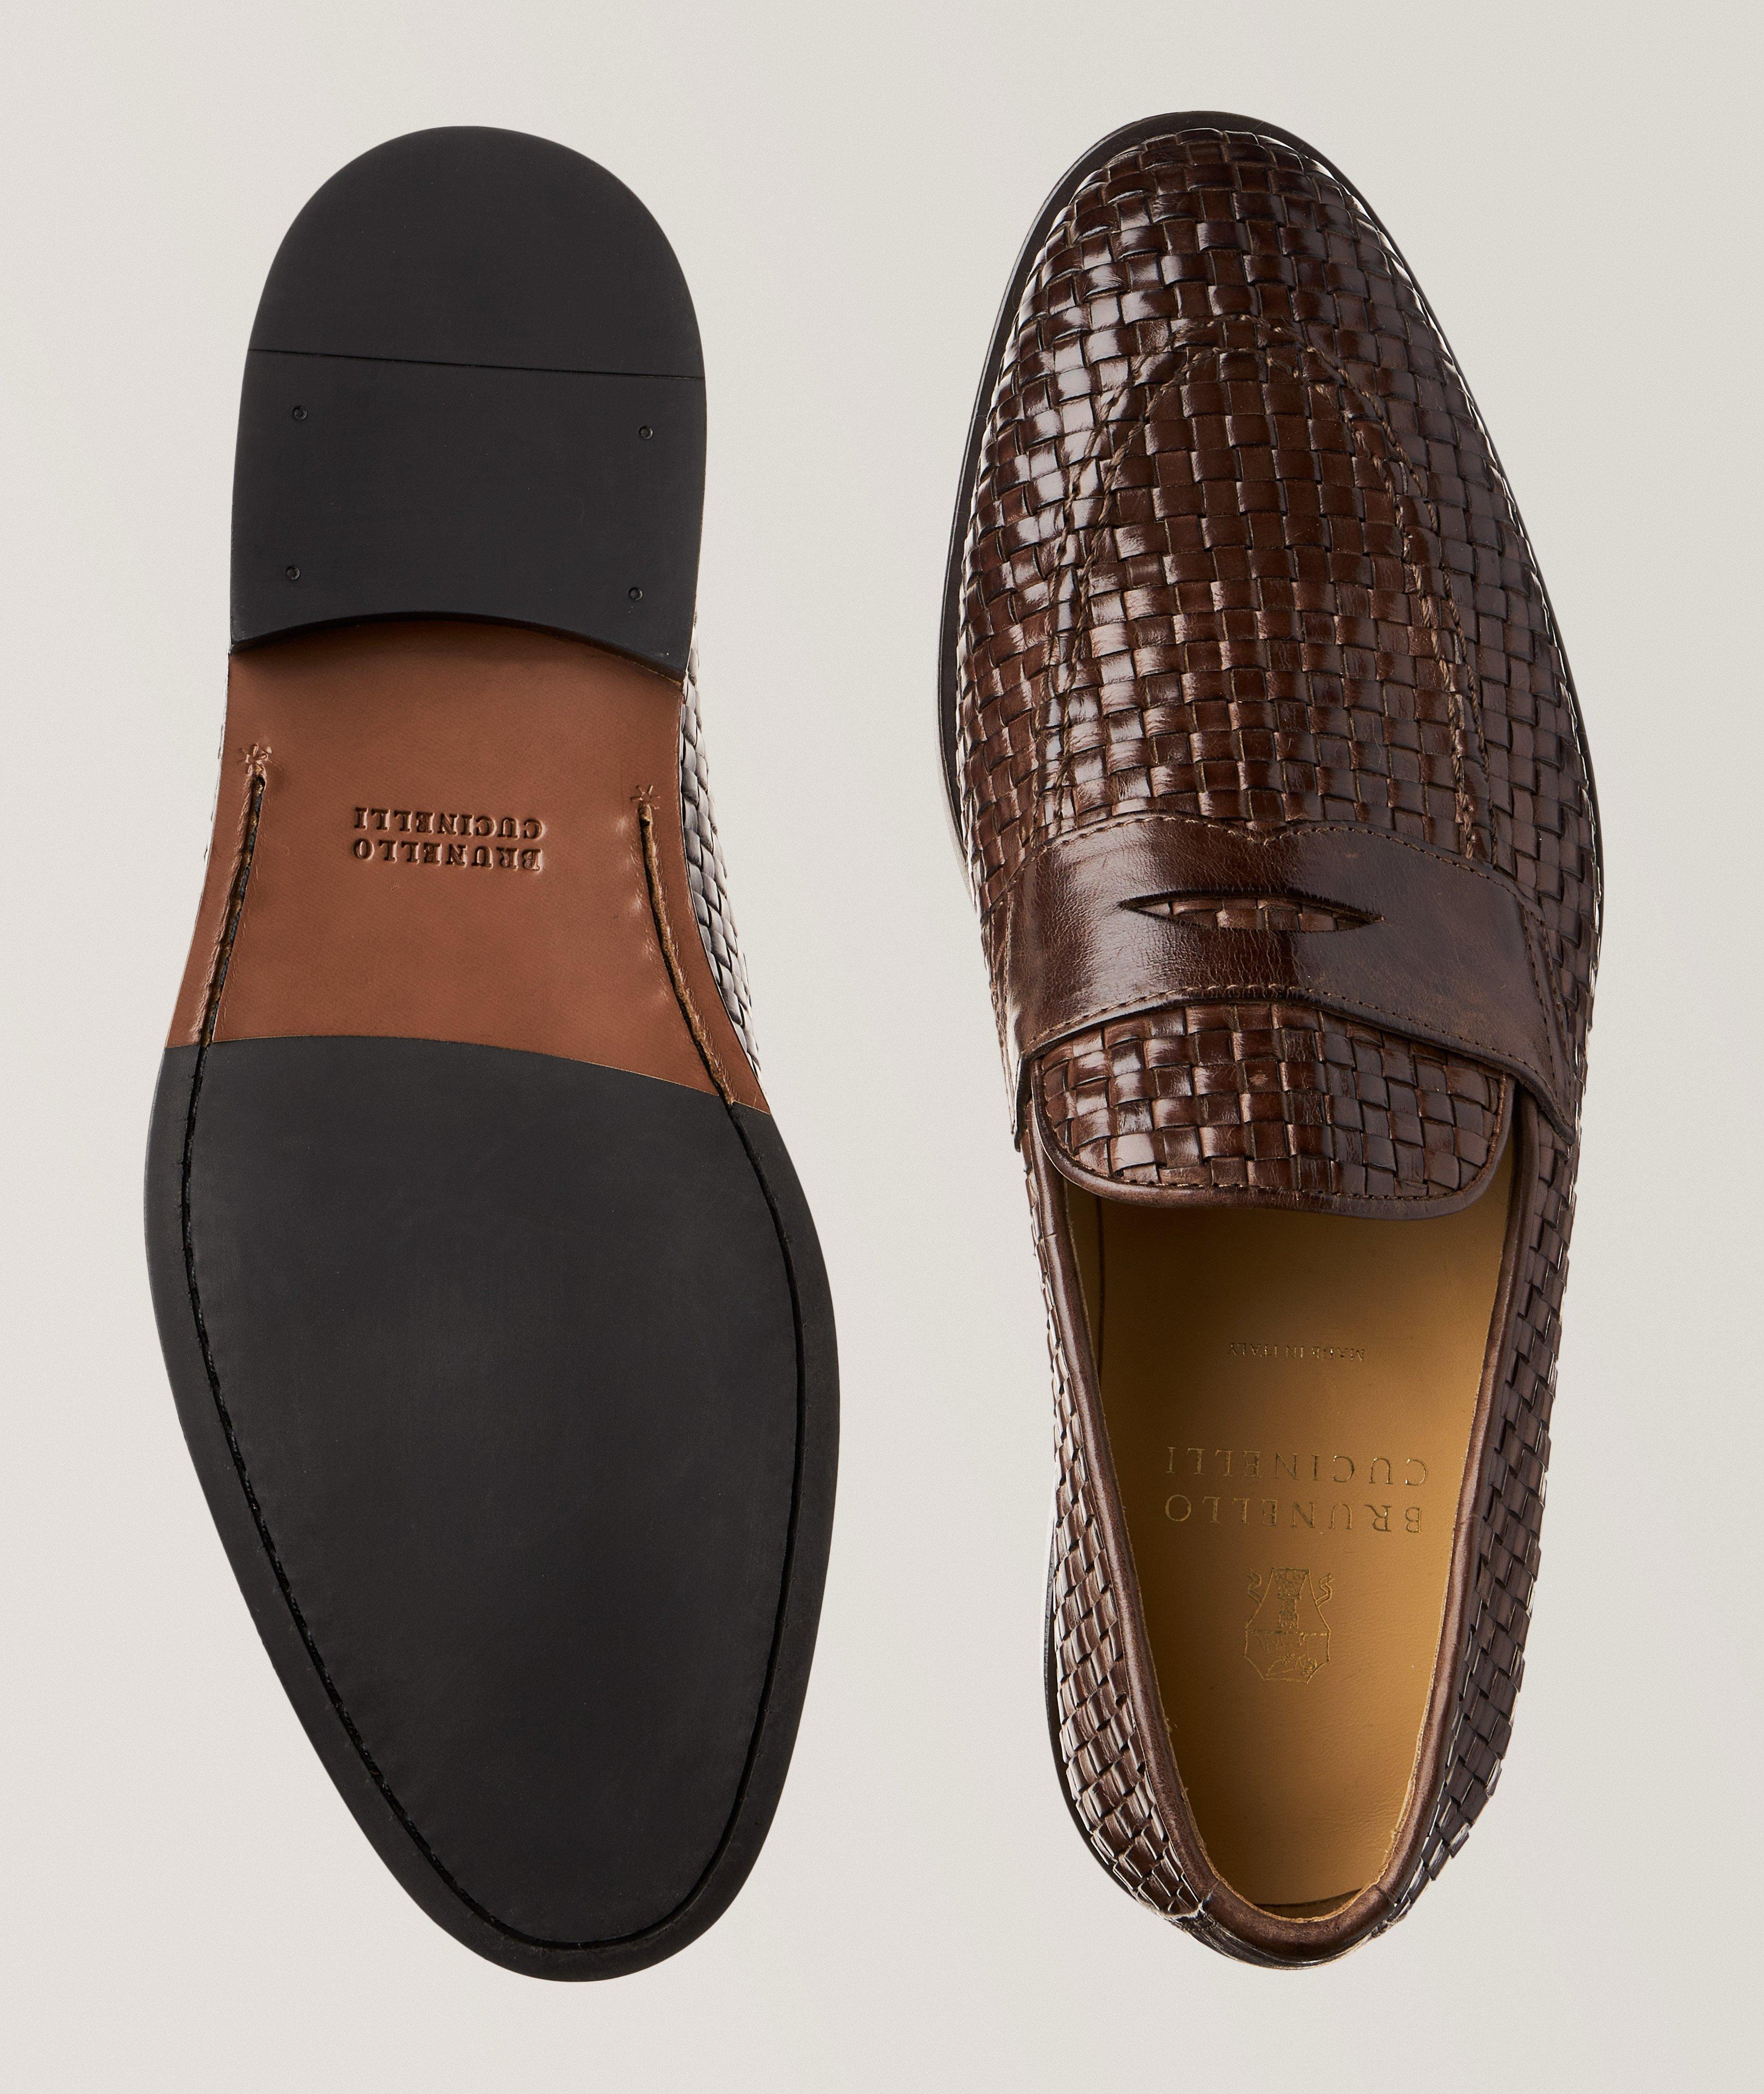 Burnished Woven Leather Penny Loafers